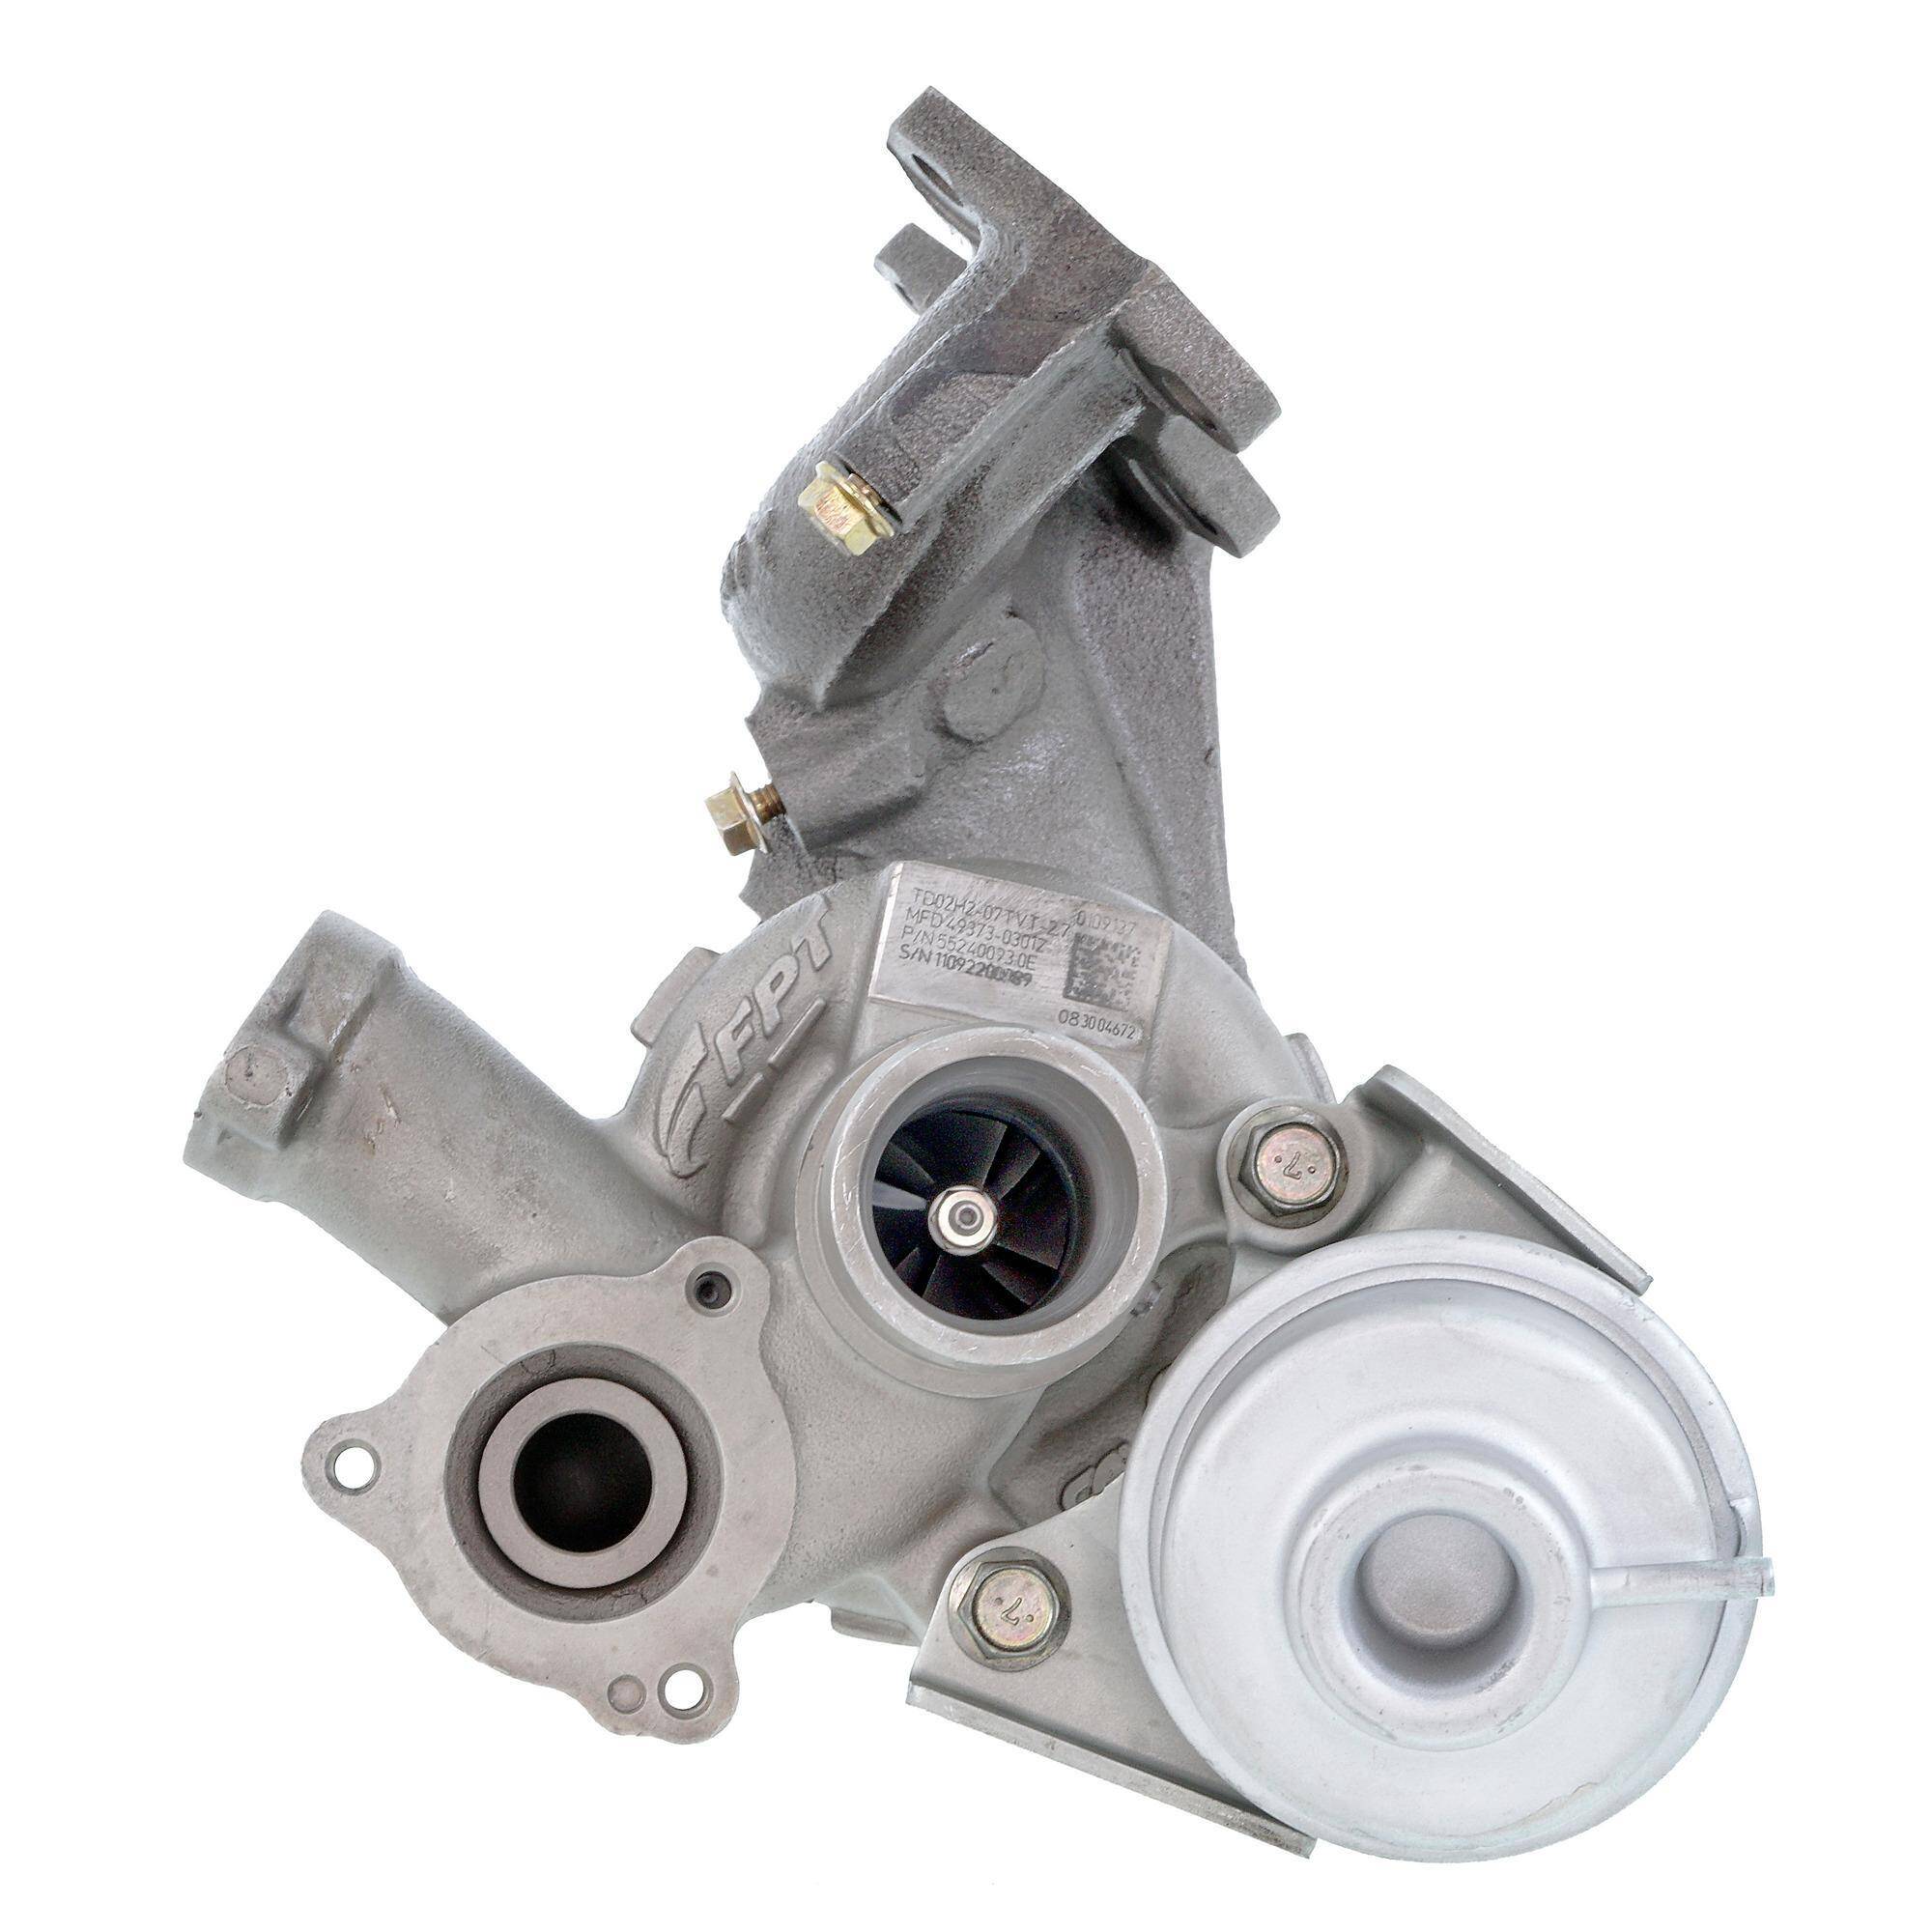 TURBOCHARGER TURBO REMANUFACTURED 49373-03012 49373-03012